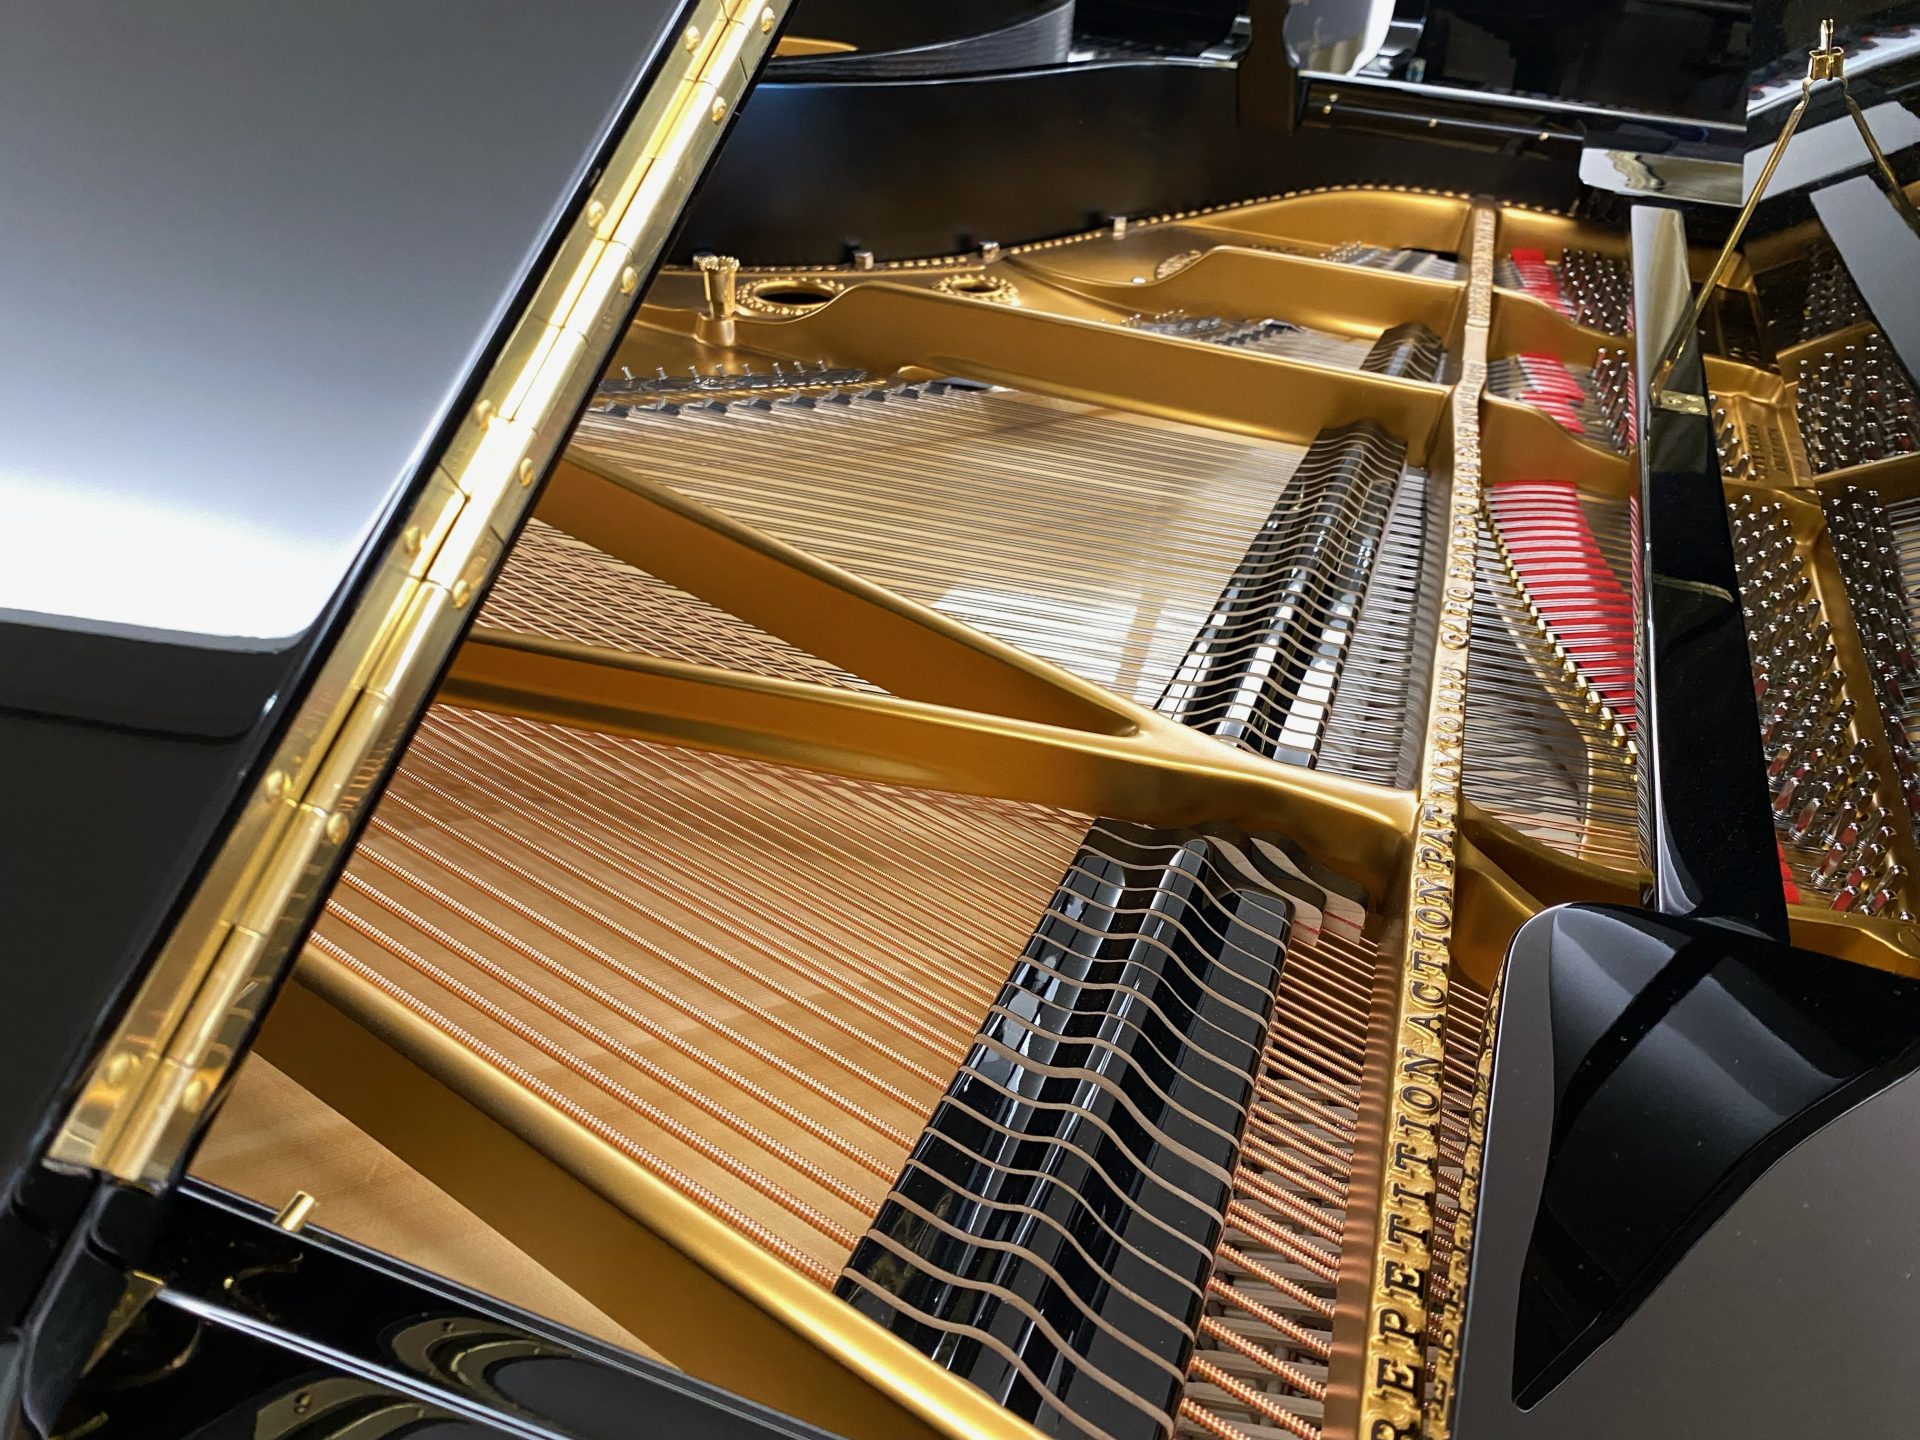 Steinway & Sons
A-188